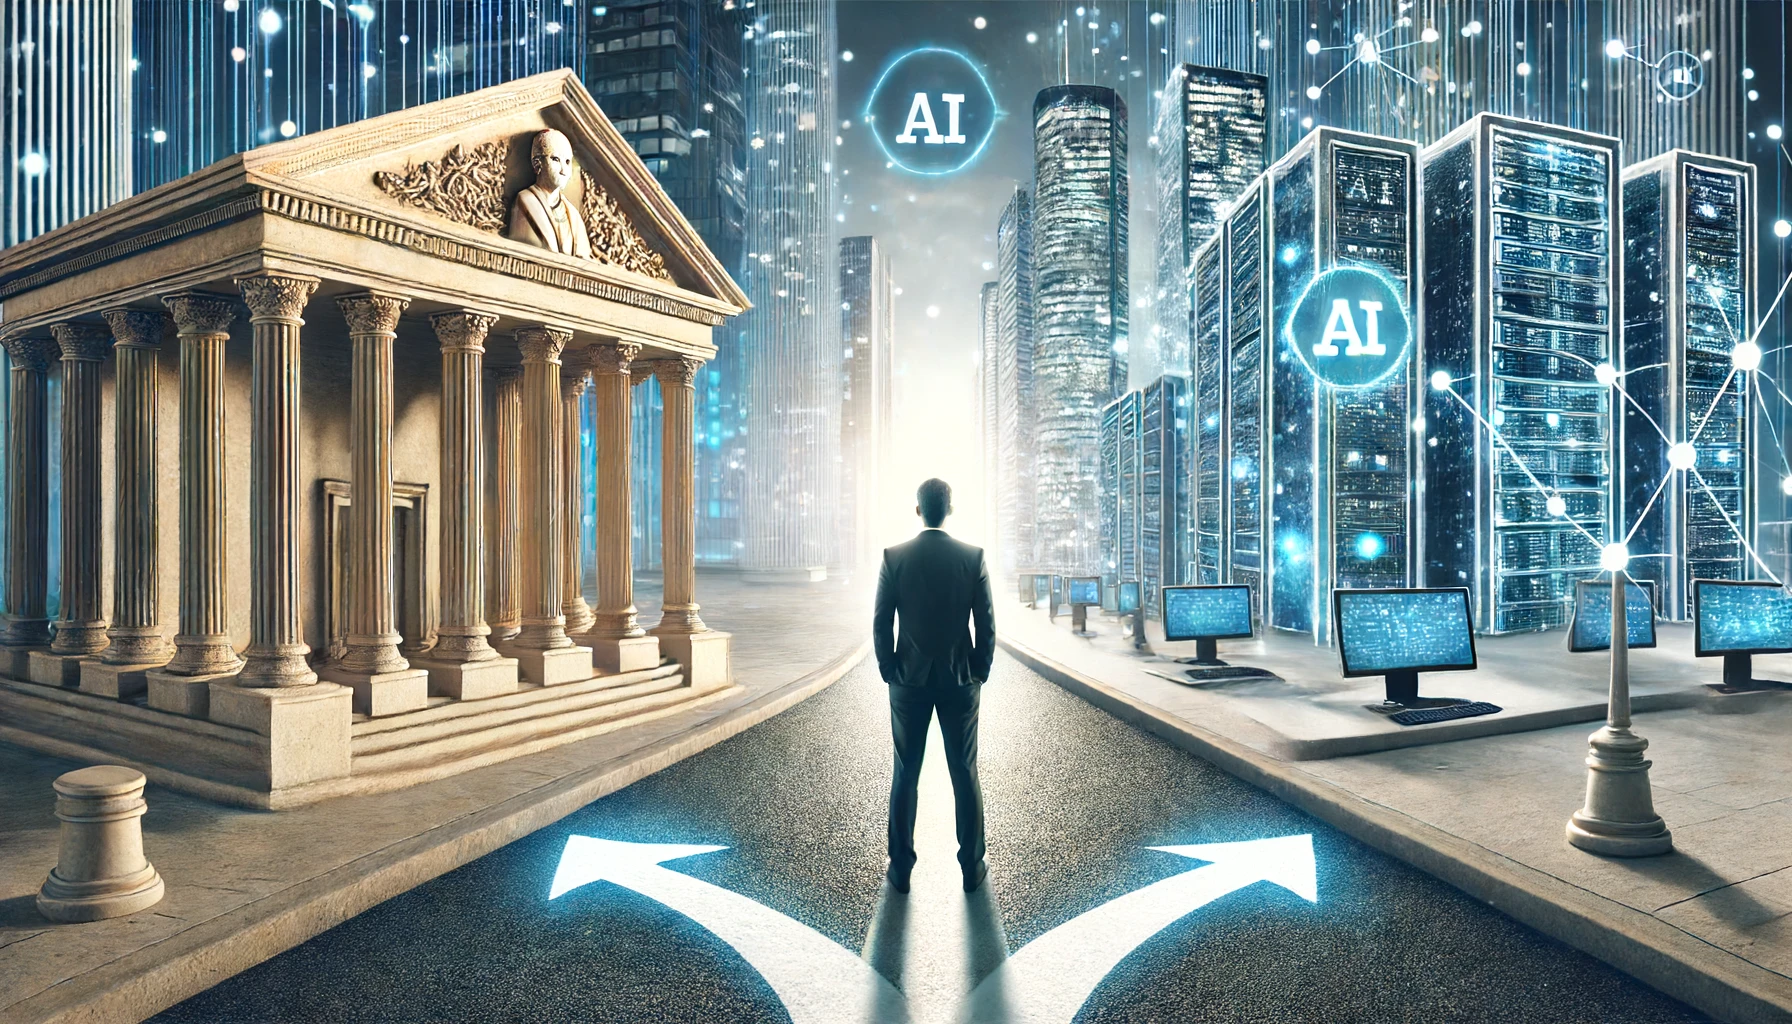 Asking AI. A person stands at a crossroads of financial decisions. One path leads to a traditional bank with imposing columns, while the other path leads to a futuristic cityscape with a sign that says "Future," representing AI-powered financial institutions.